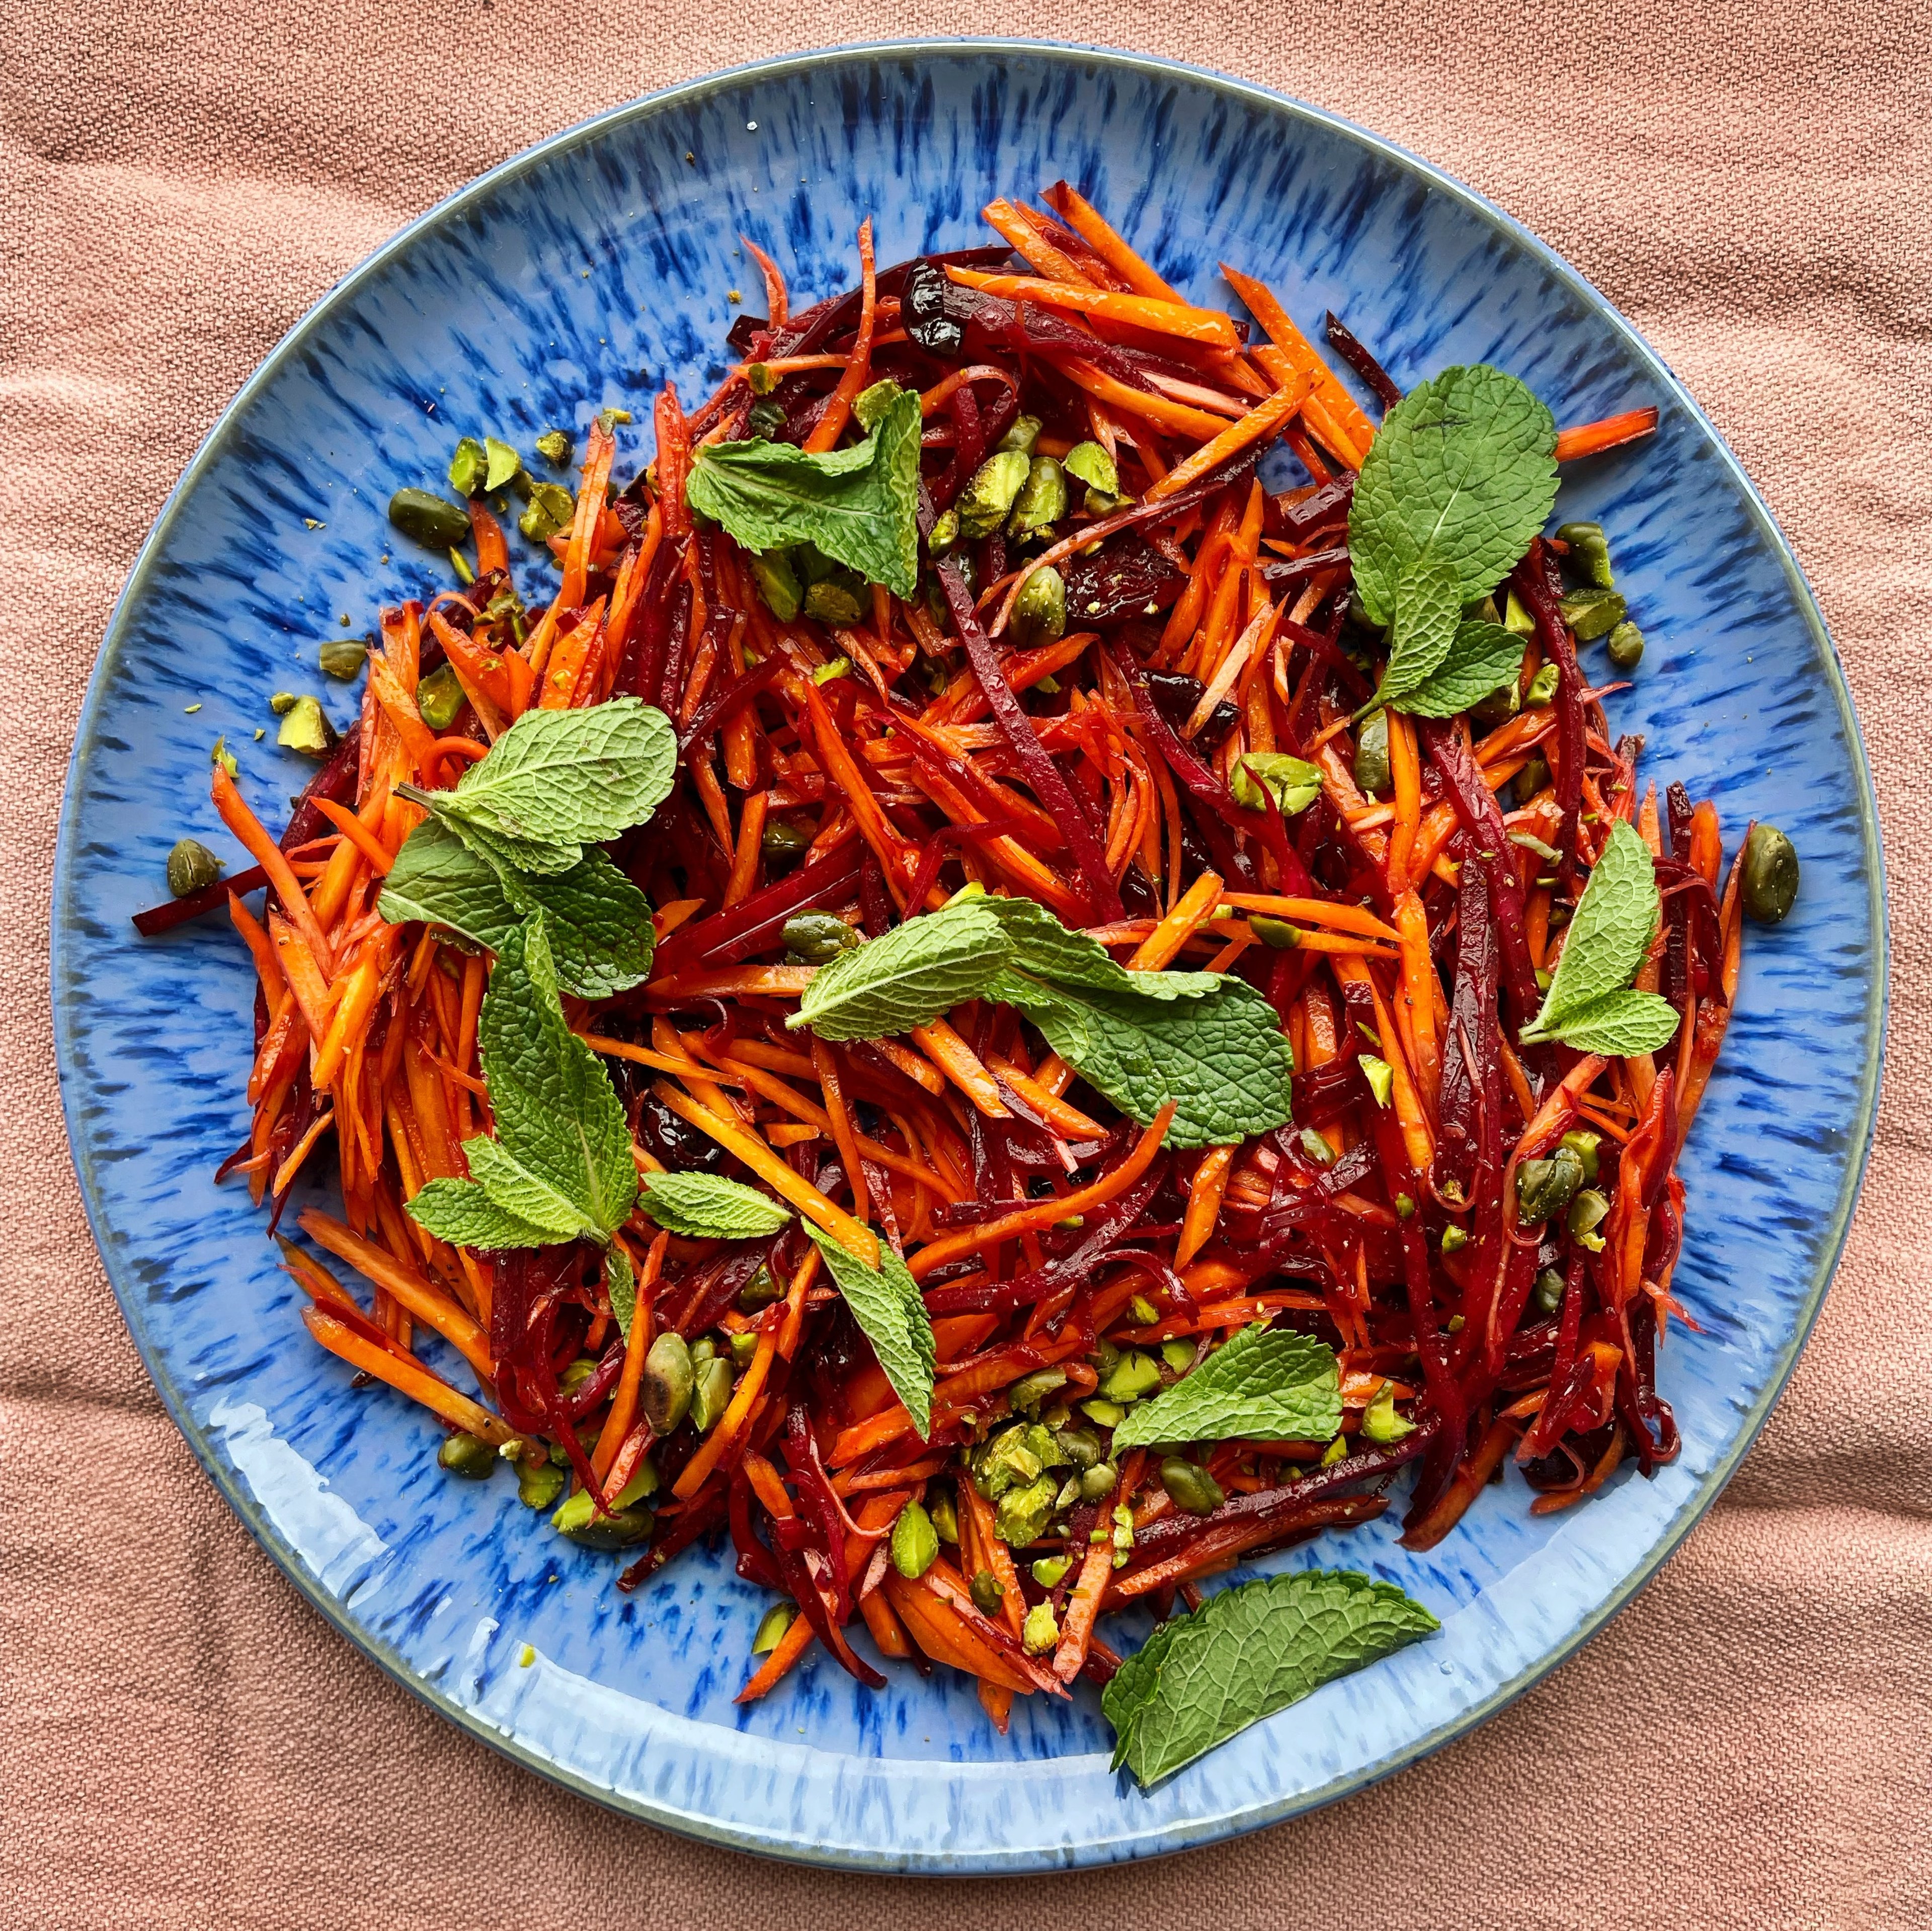 Carrot salad with cranberries and pistachios